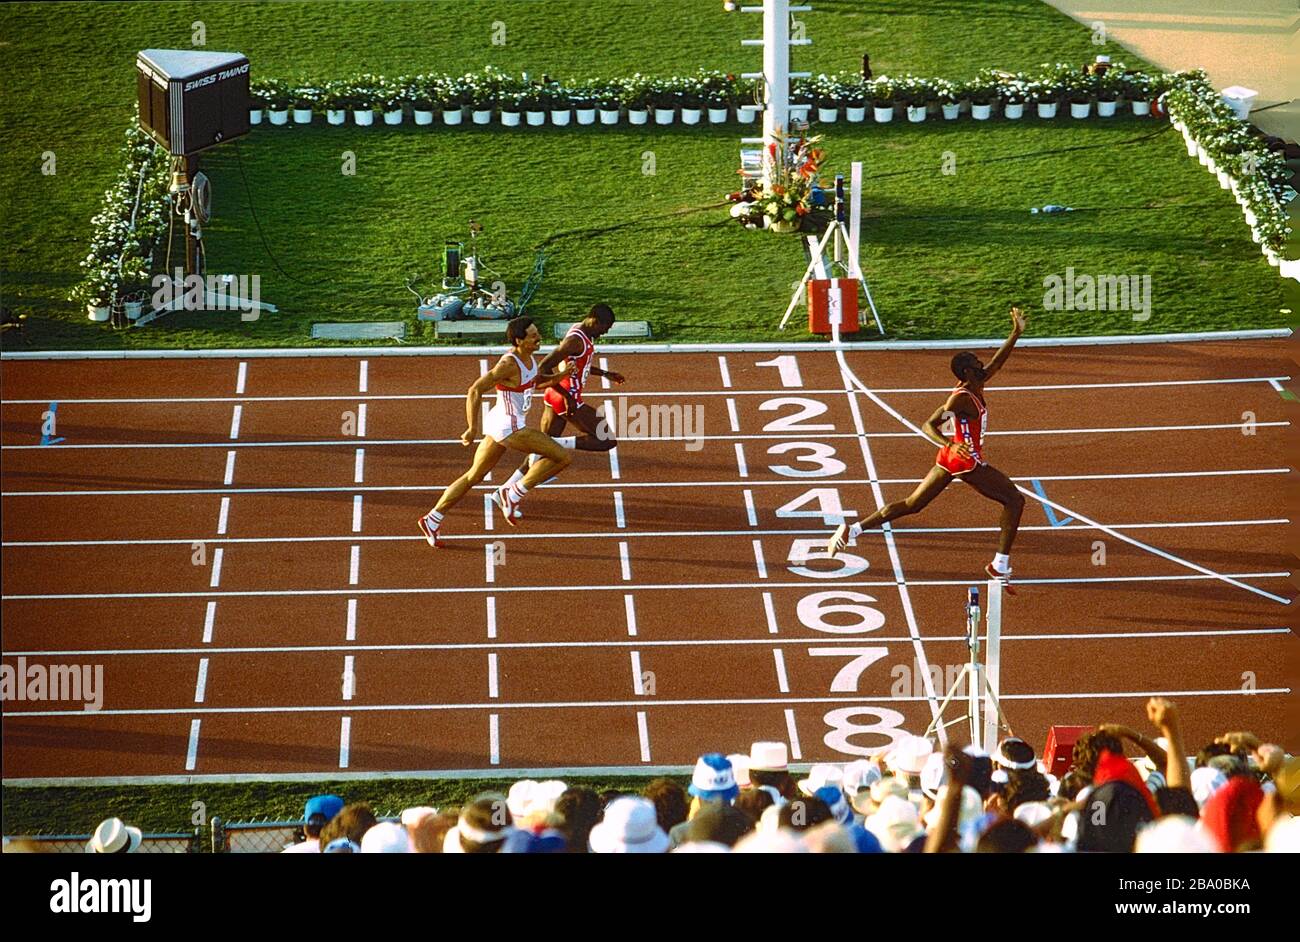 Edwin Moses (USA) competing at the 1984 US Olympic Team Trials Stock Photo